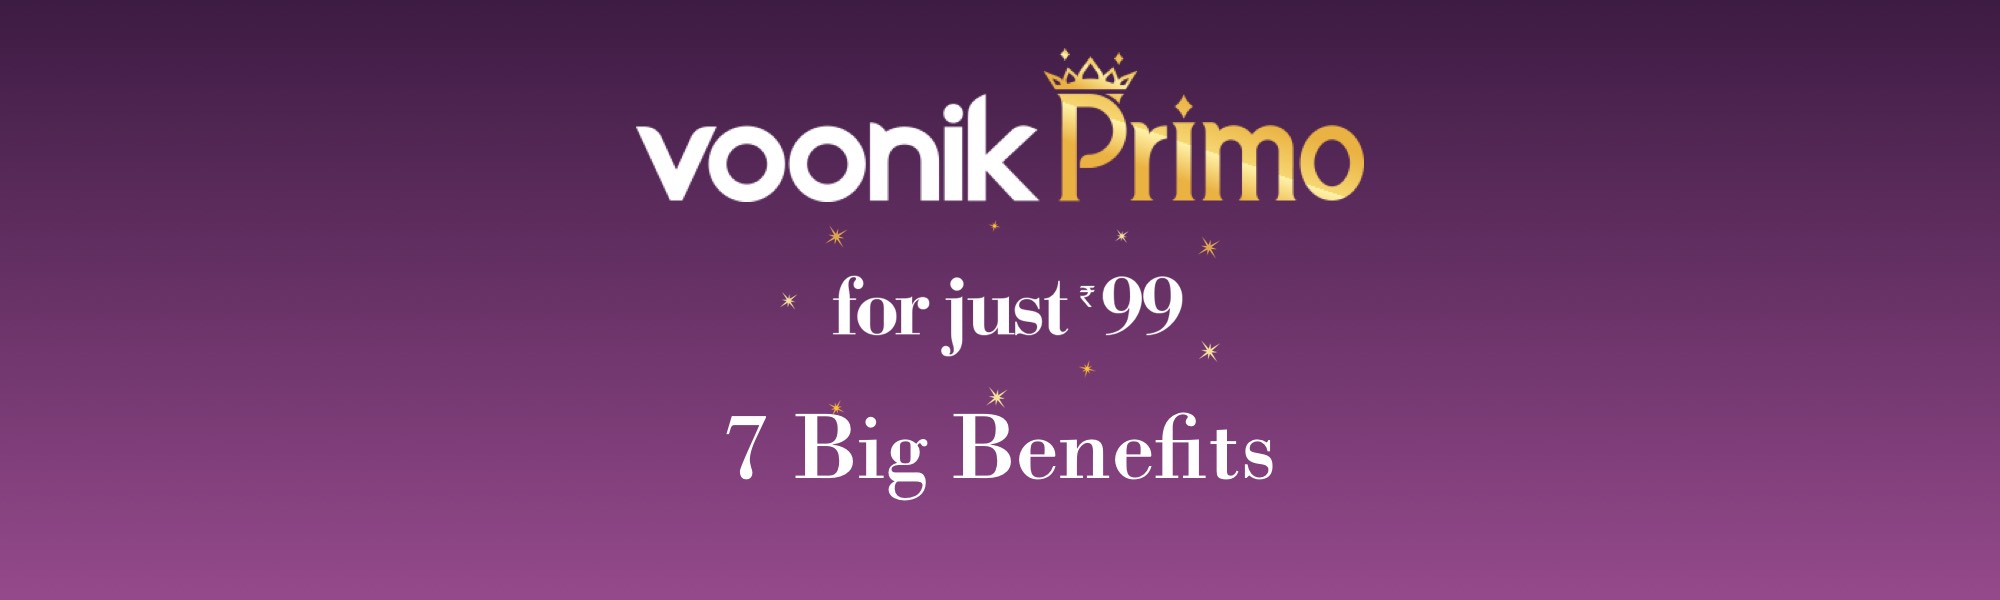 Buy Voonik Primo Get Free Delivery On All Products + 200 Credits Worth Rs.200 Only For Rs.99